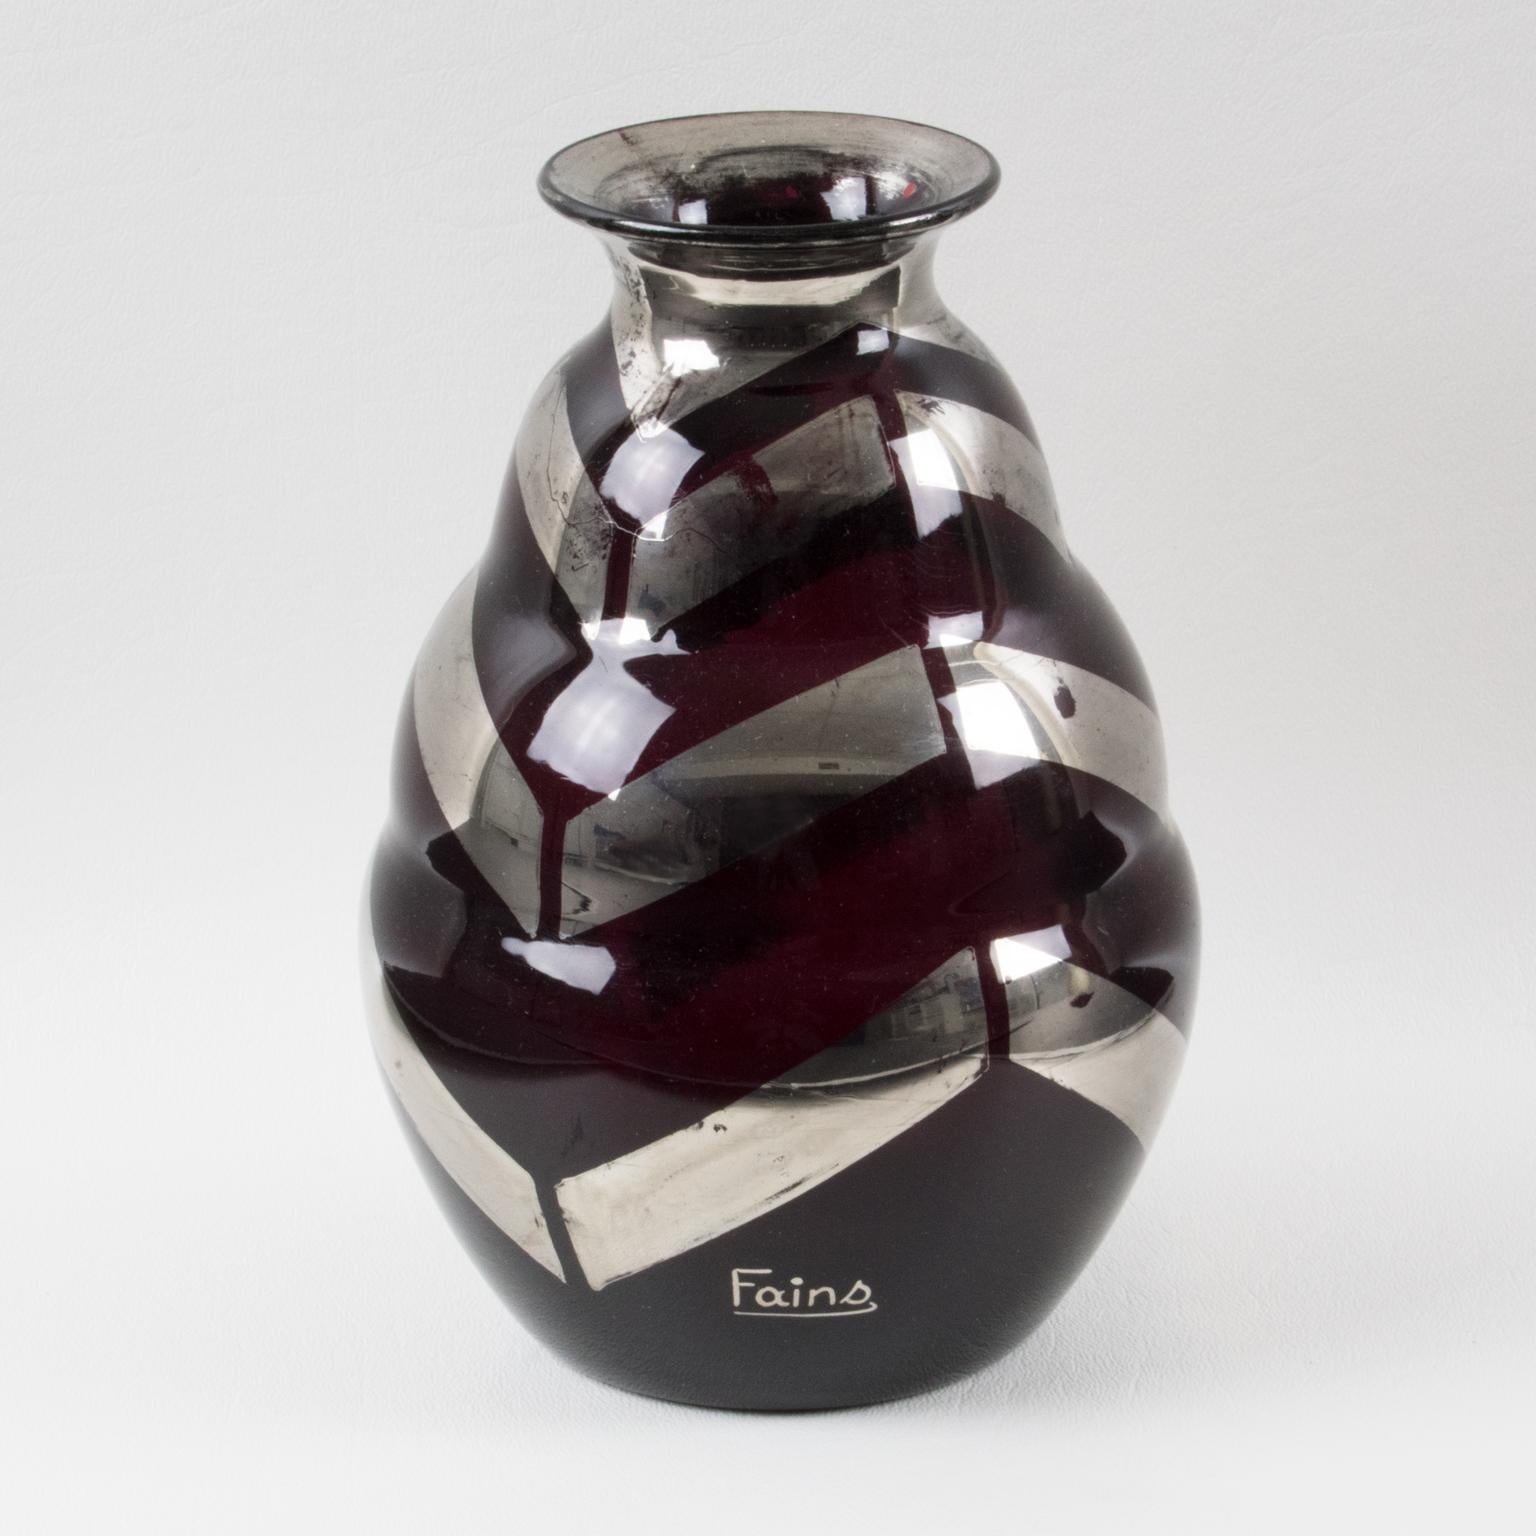 This is a stylish Art Deco black opaline glass vase by Fains, France, in the 1930s. The vase is decorated with a silver deposit in a geometric zig-zag pattern. The vase is marked 